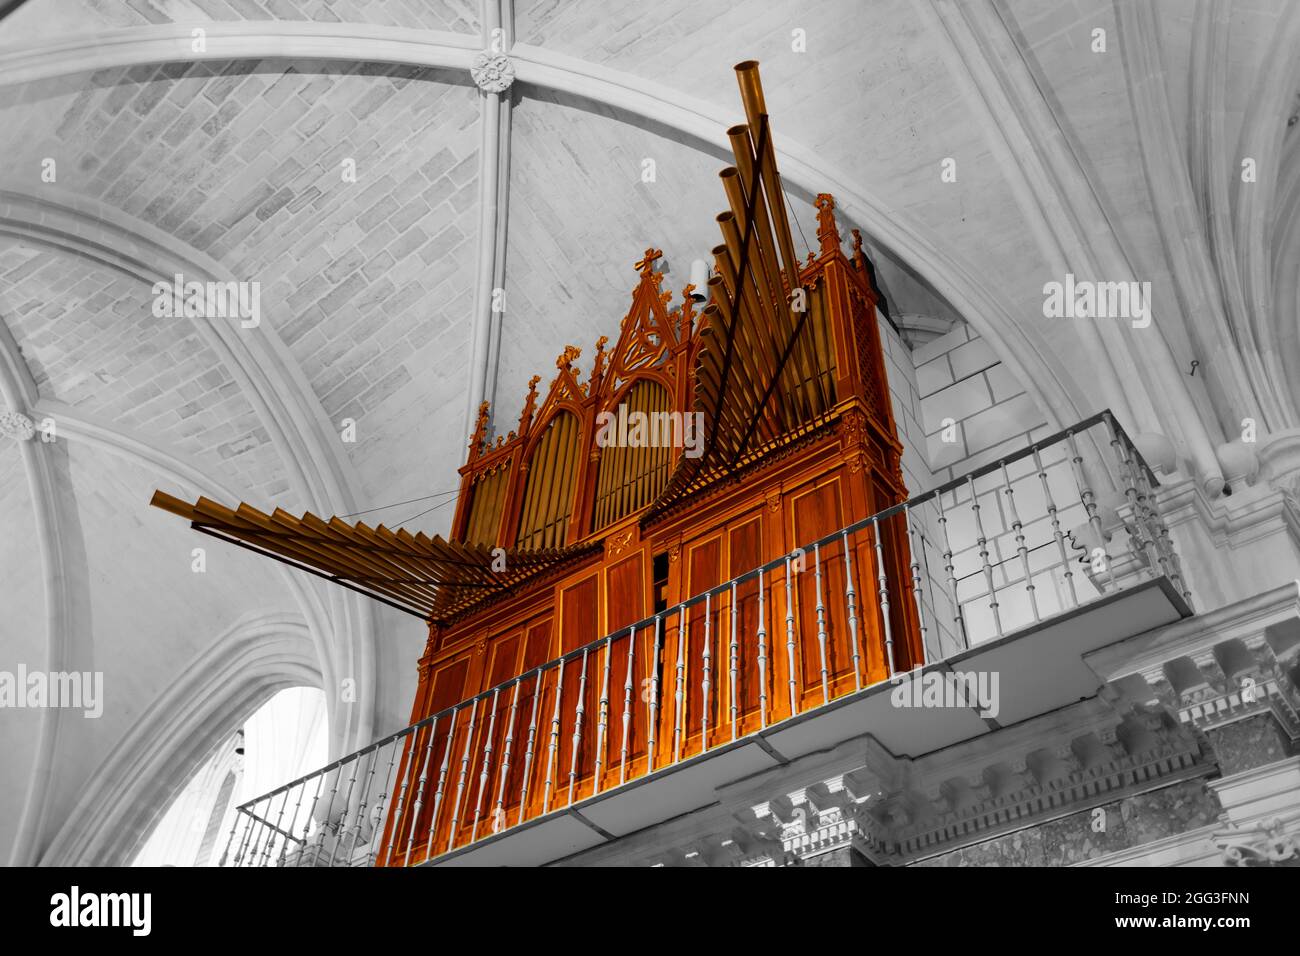 13th century wooden organ with metal trumpets, instrument detail on black and white building background Stock Photo